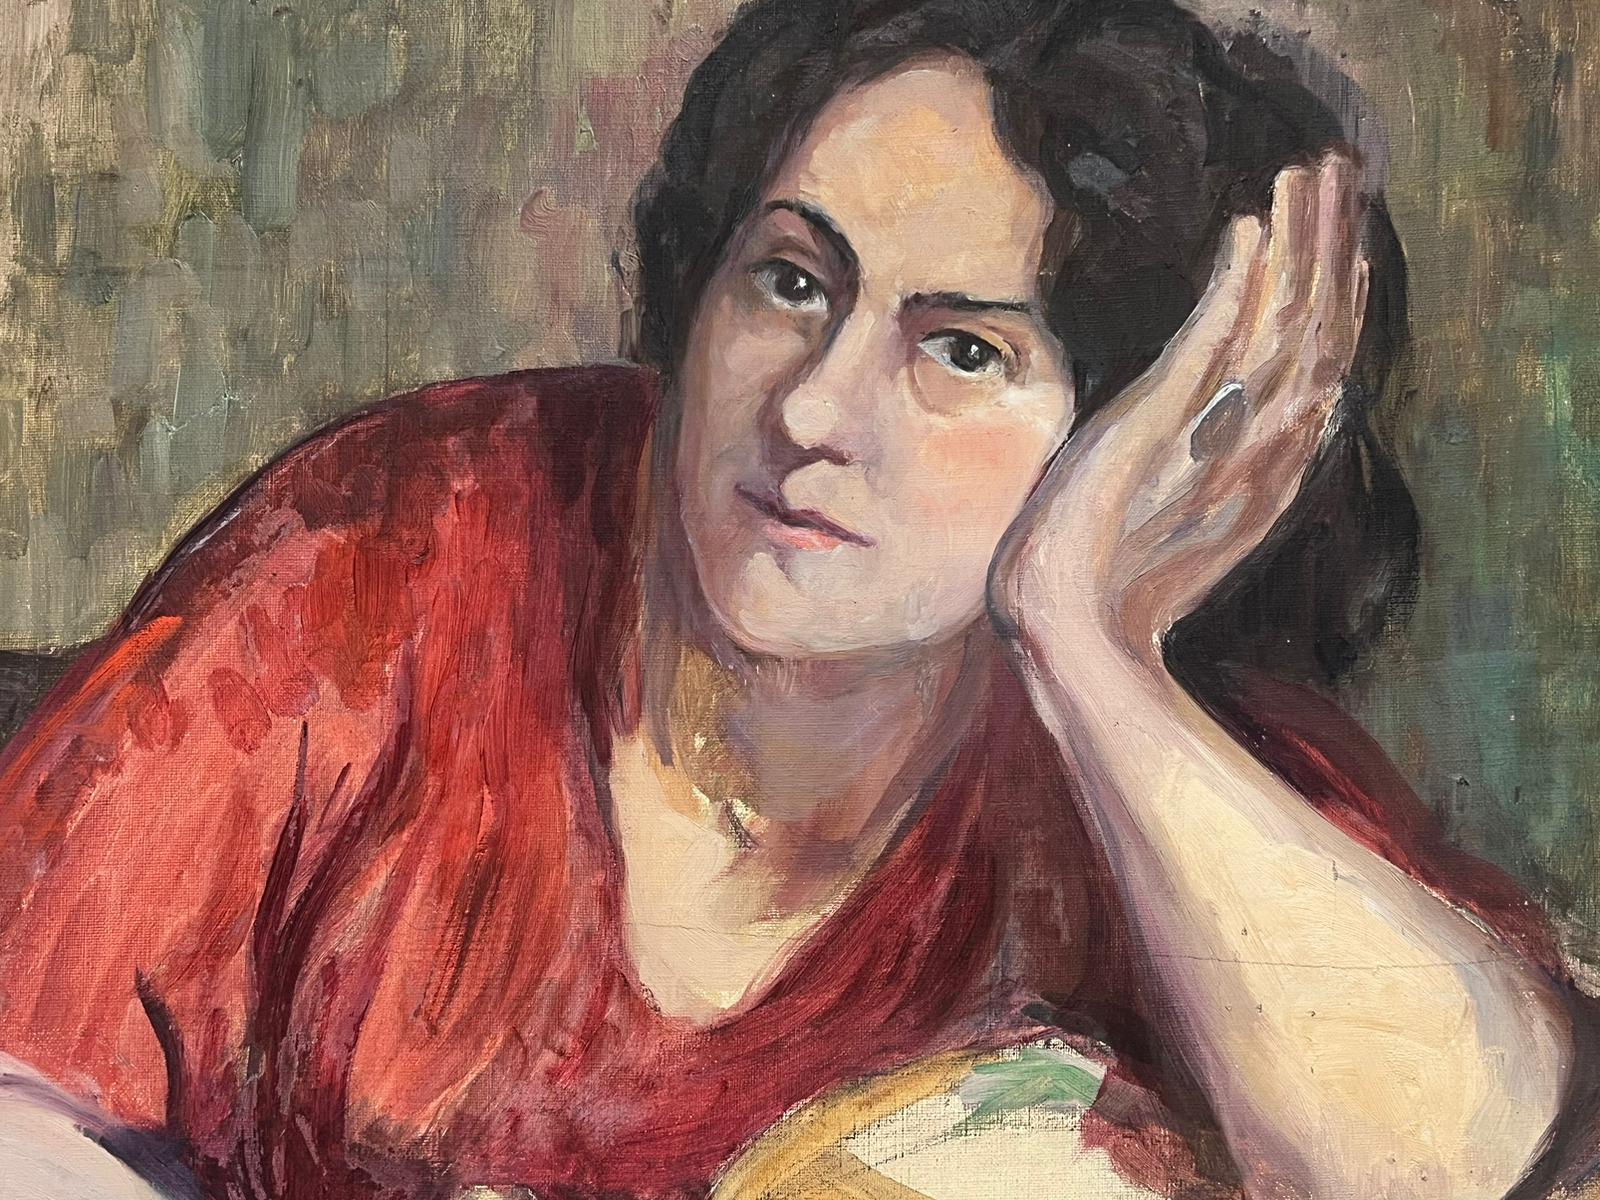 Portrait of a Woman
by Louise Alix (French, 1888-1980) *see notes below
oil painting on canvas unframed
measures: 20 inches high by 24 inches wide
condition: overall very good and sound, a few scuffs and marks to the surface and wear to the four